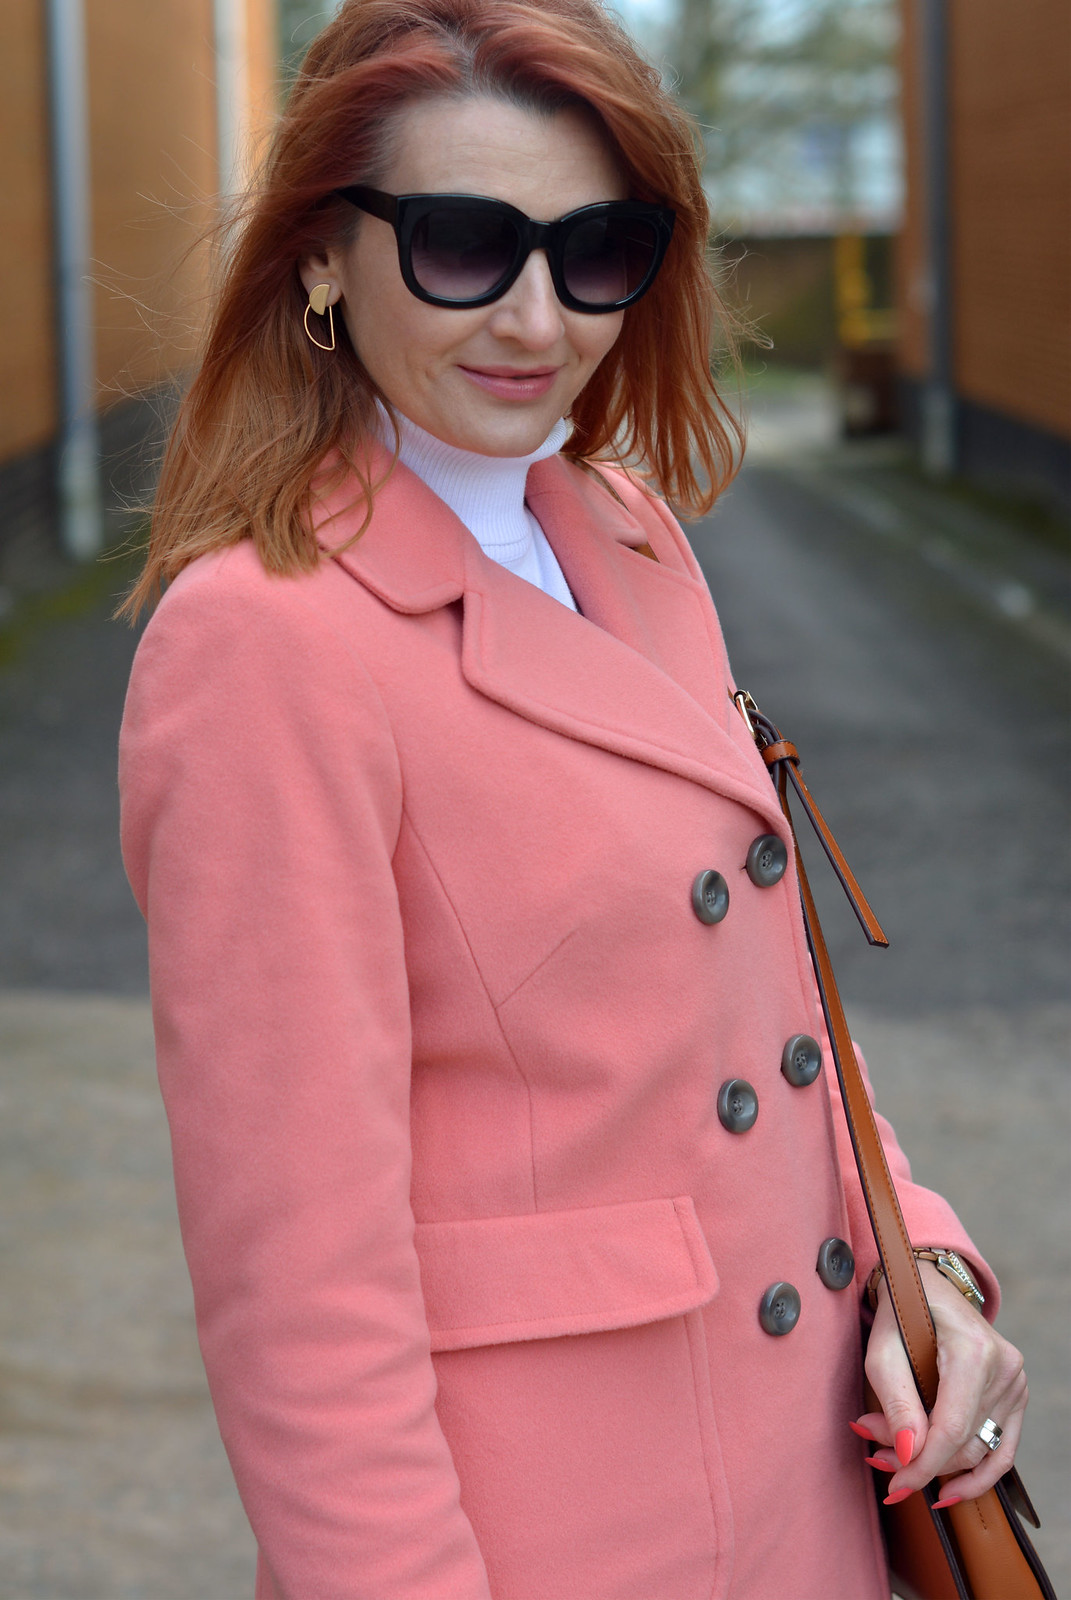 Winter style: Peach coat with white roll neck | Not Dressed As Lamb